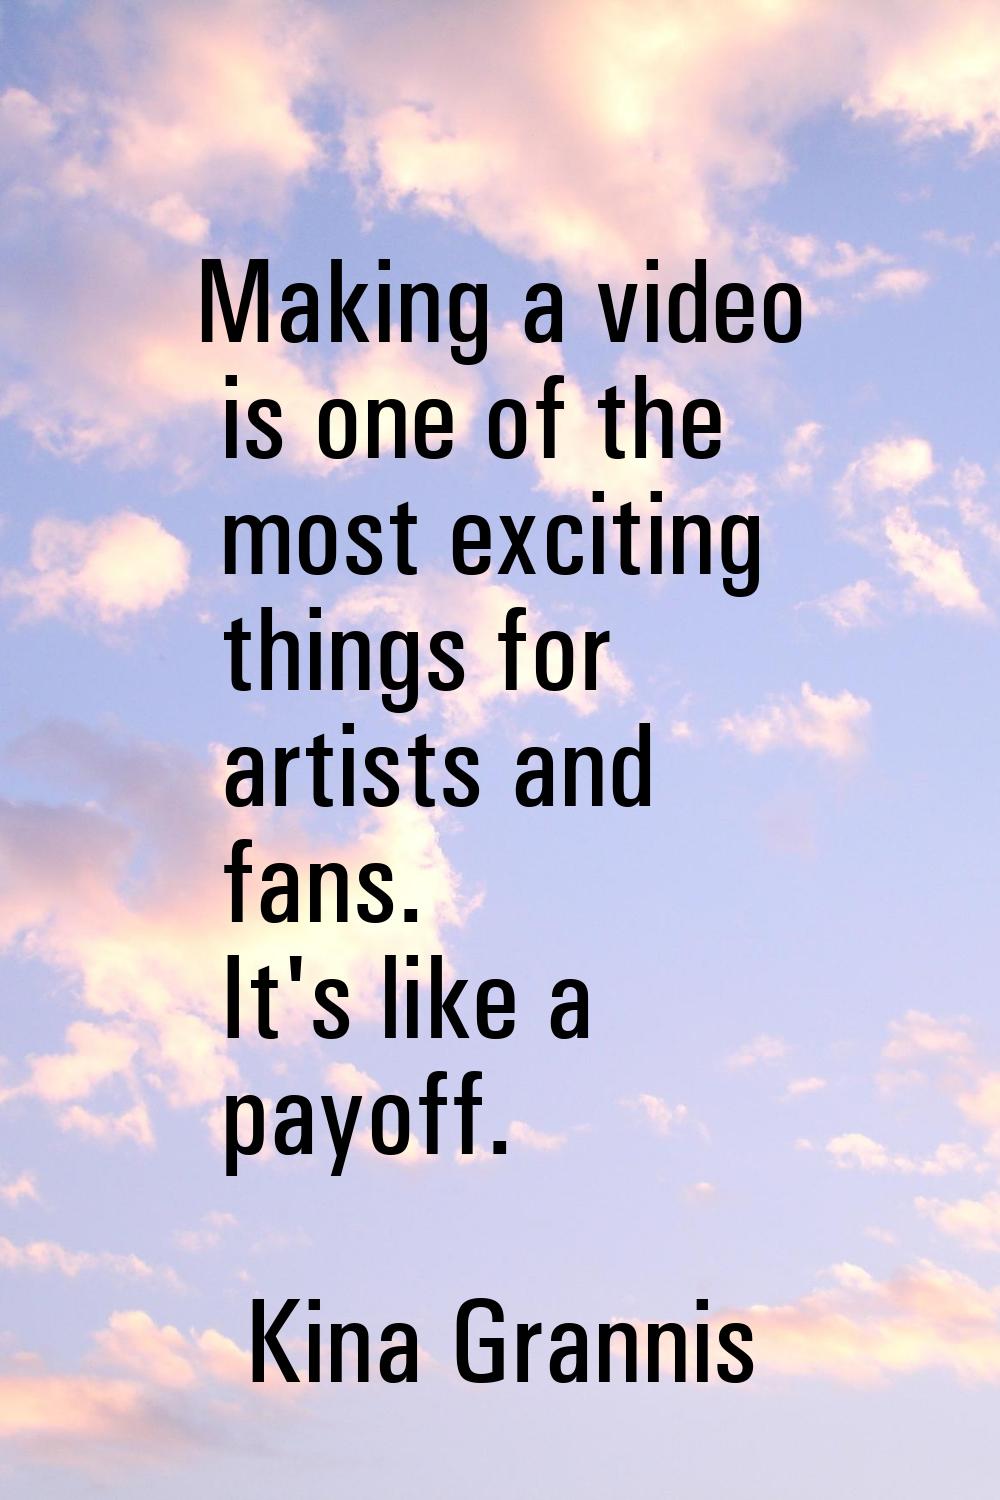 Making a video is one of the most exciting things for artists and fans. It's like a payoff.